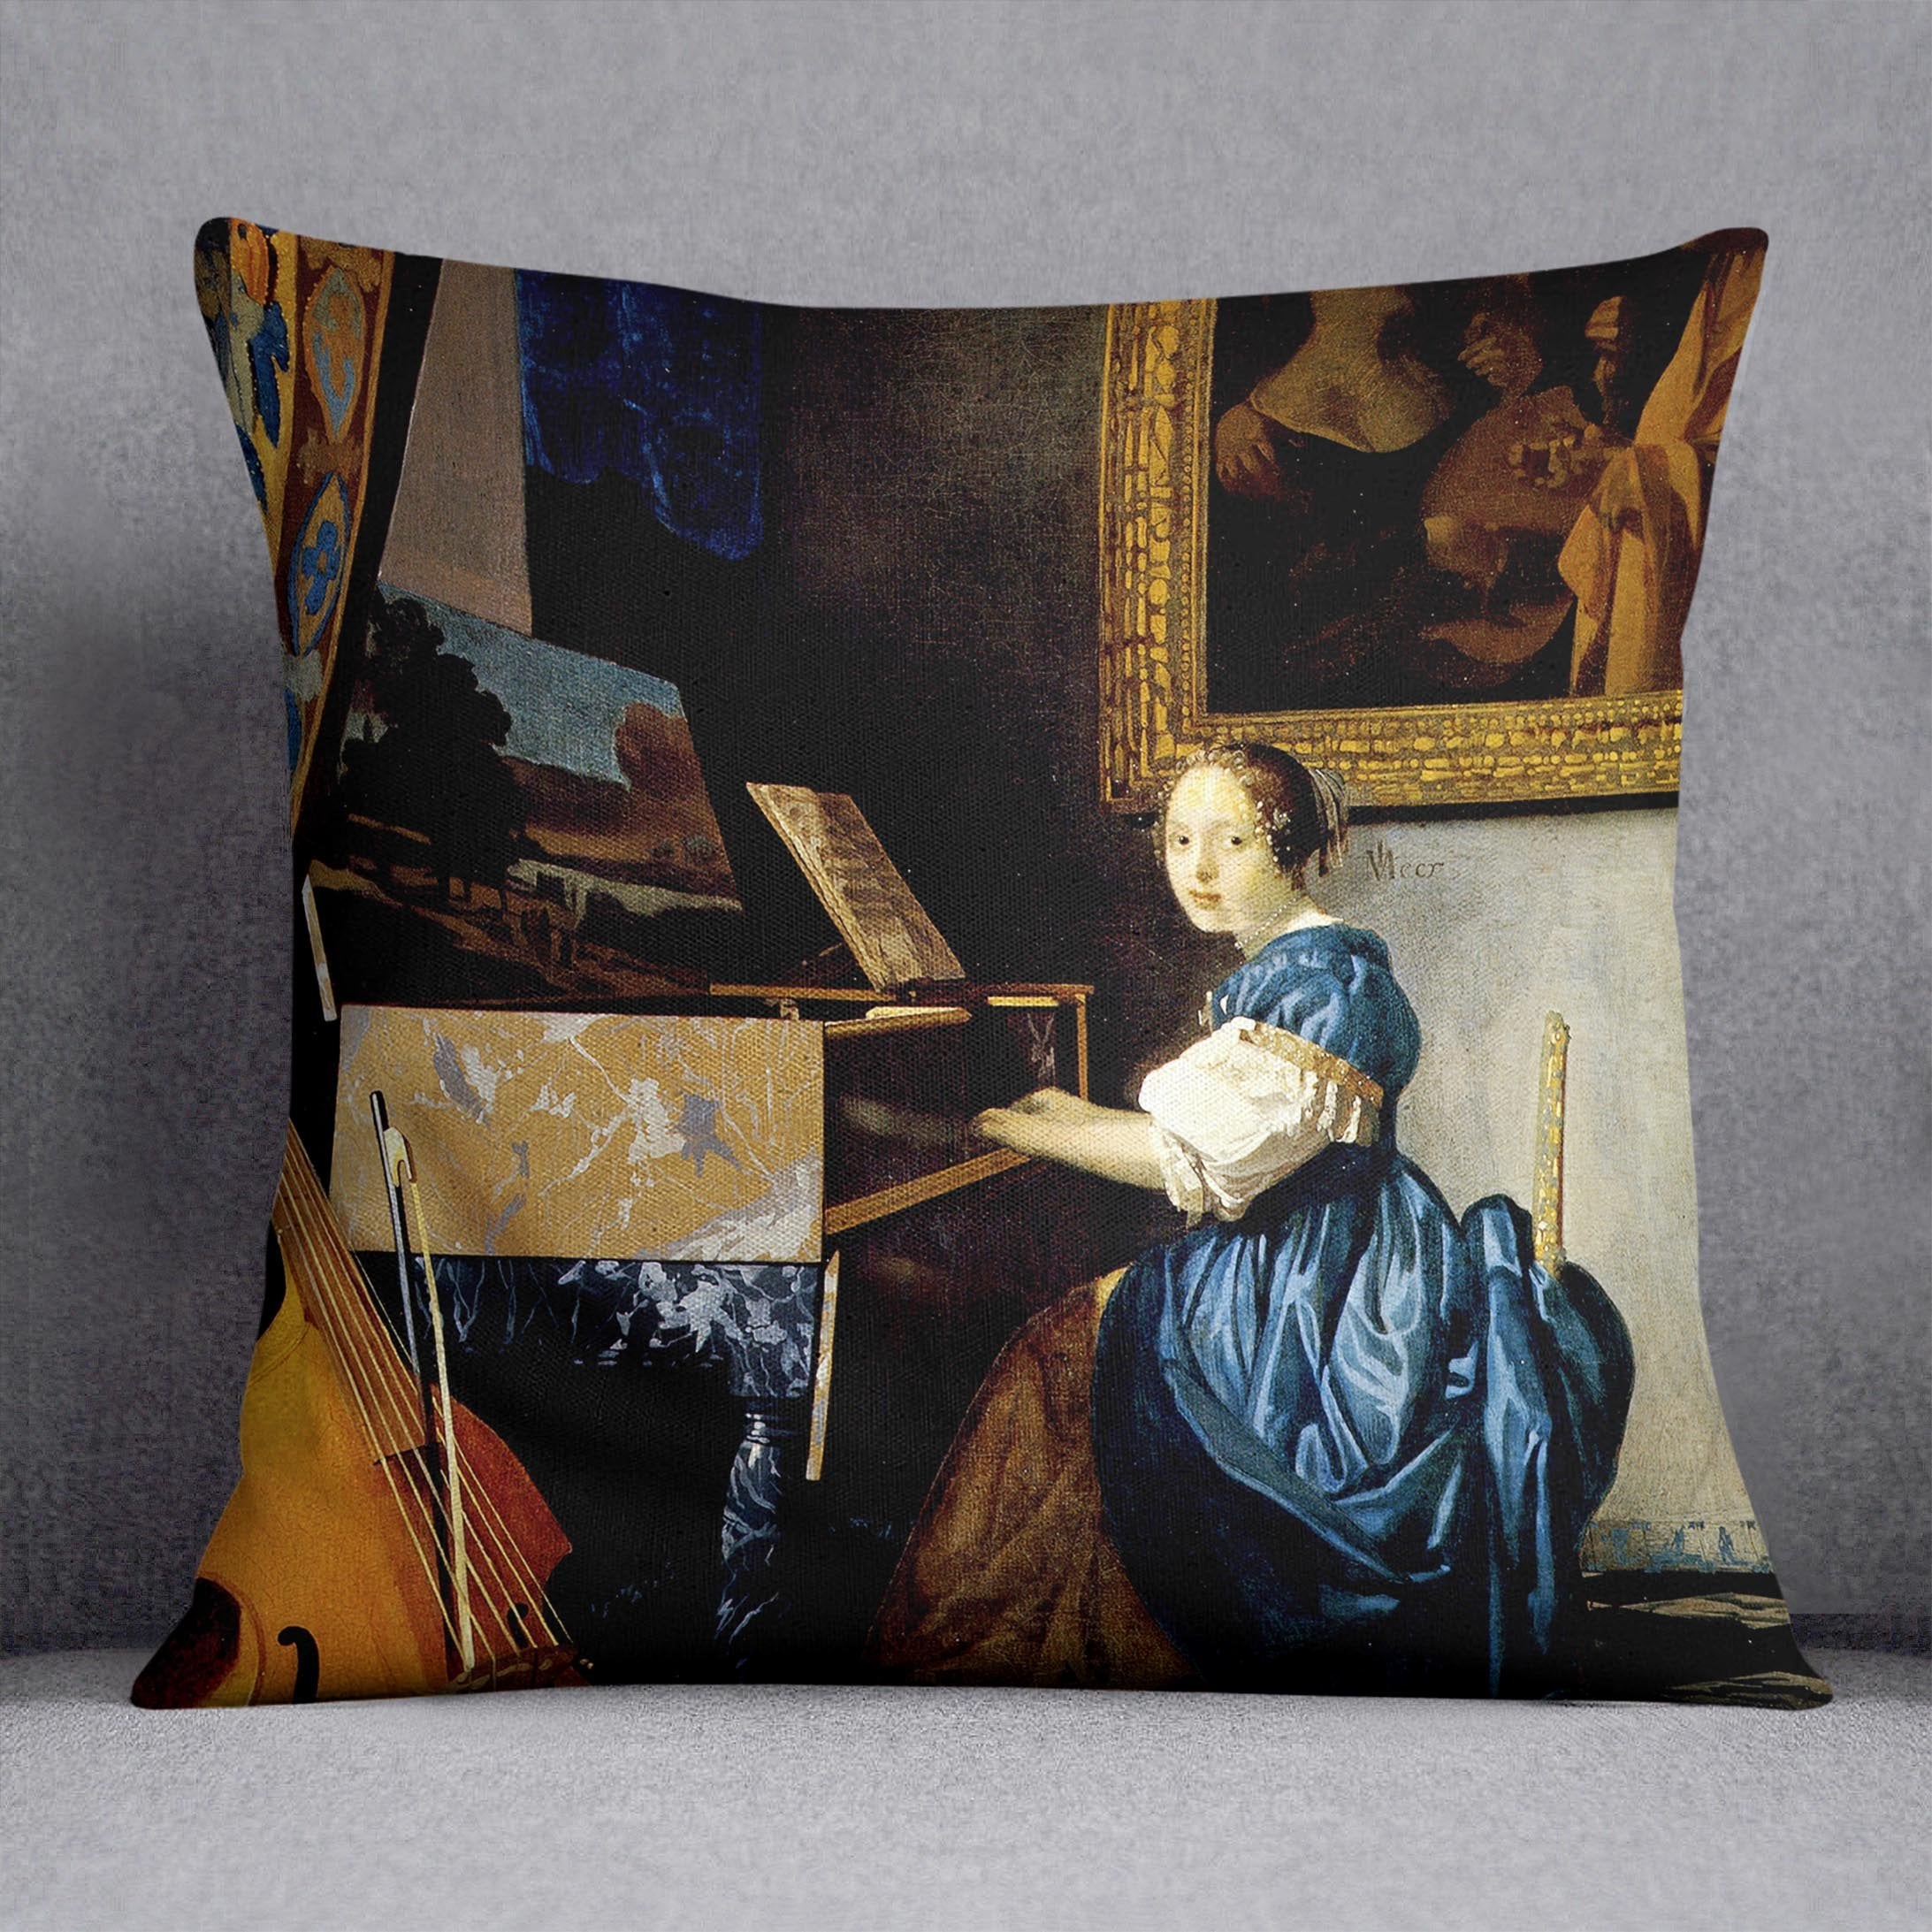 Dame on spinet by Vermeer Cushion